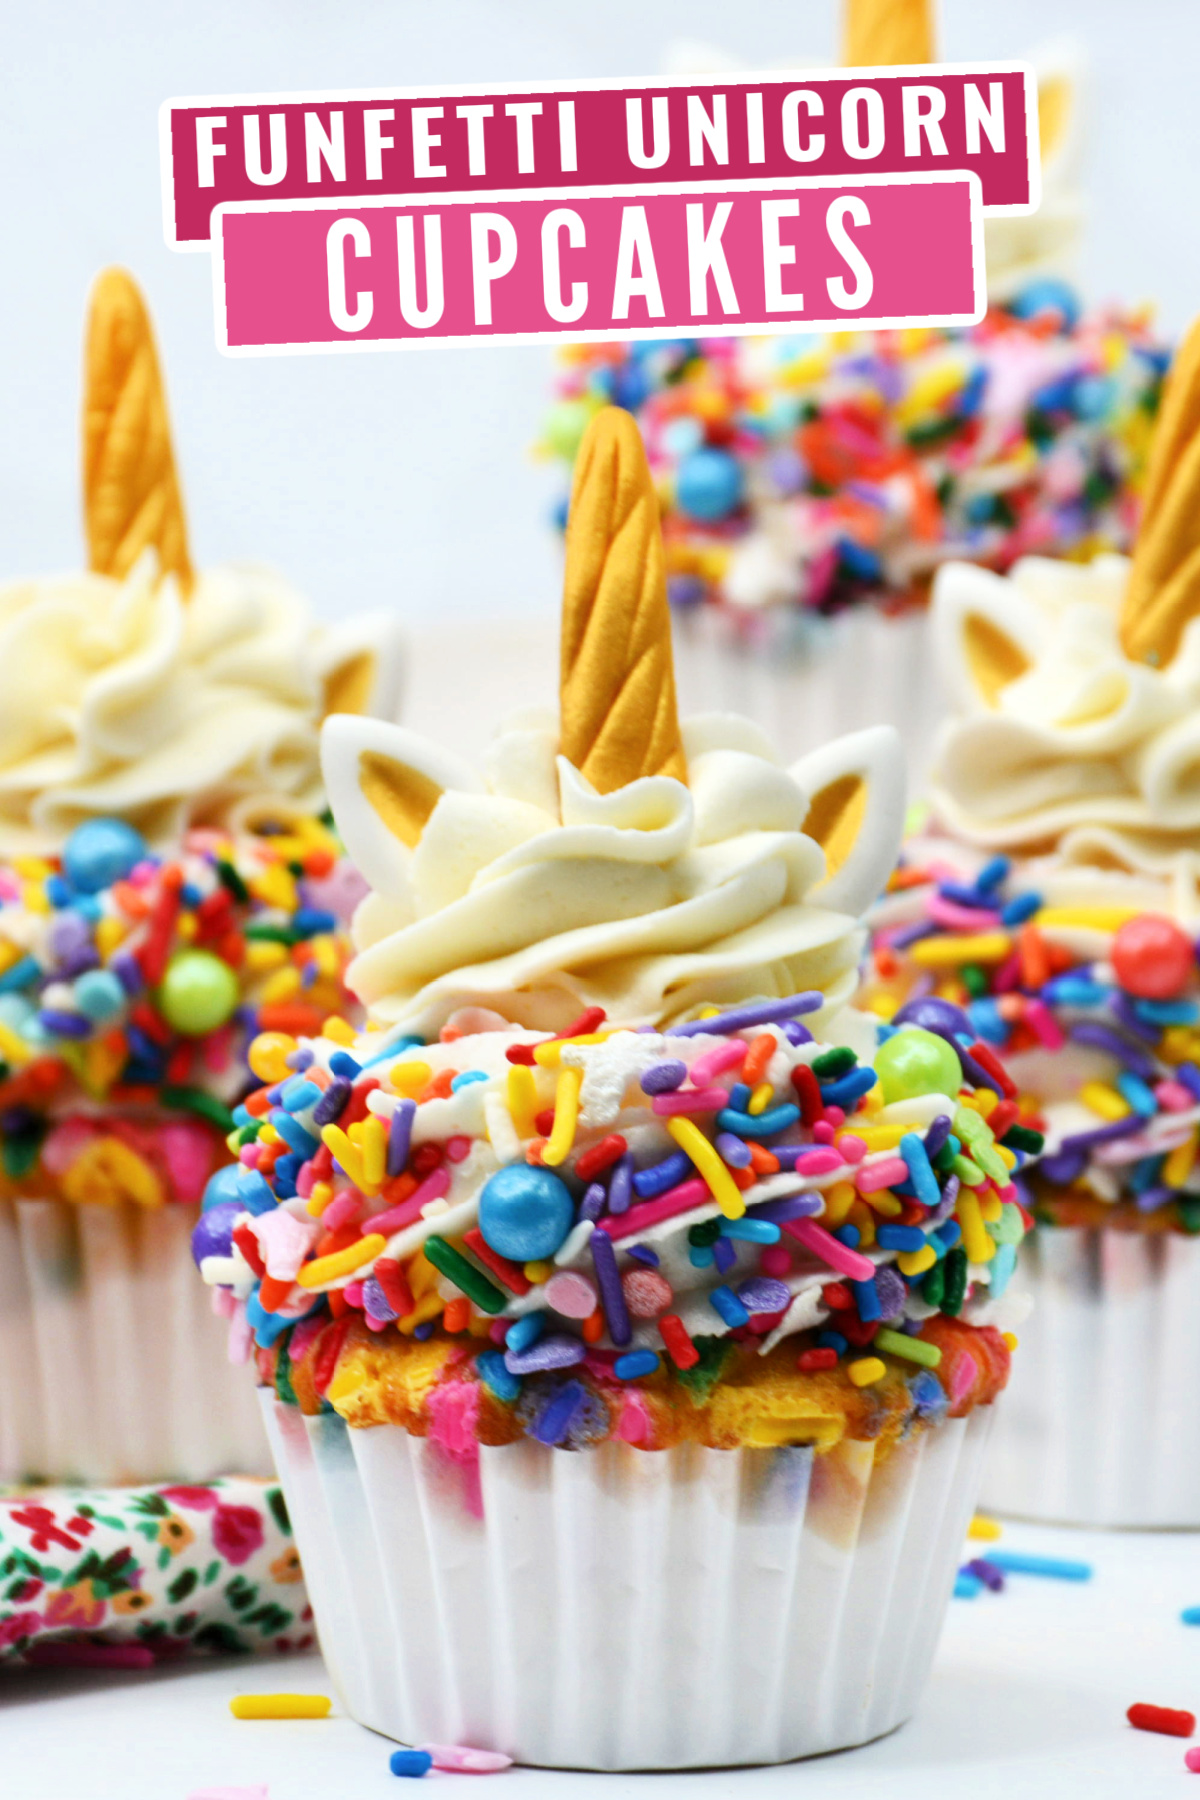 Love unicorns? These cupcakes will make your day! This easy recipe for Unicorn Funfetti Cupcakes is perfect for parties and special occasions.